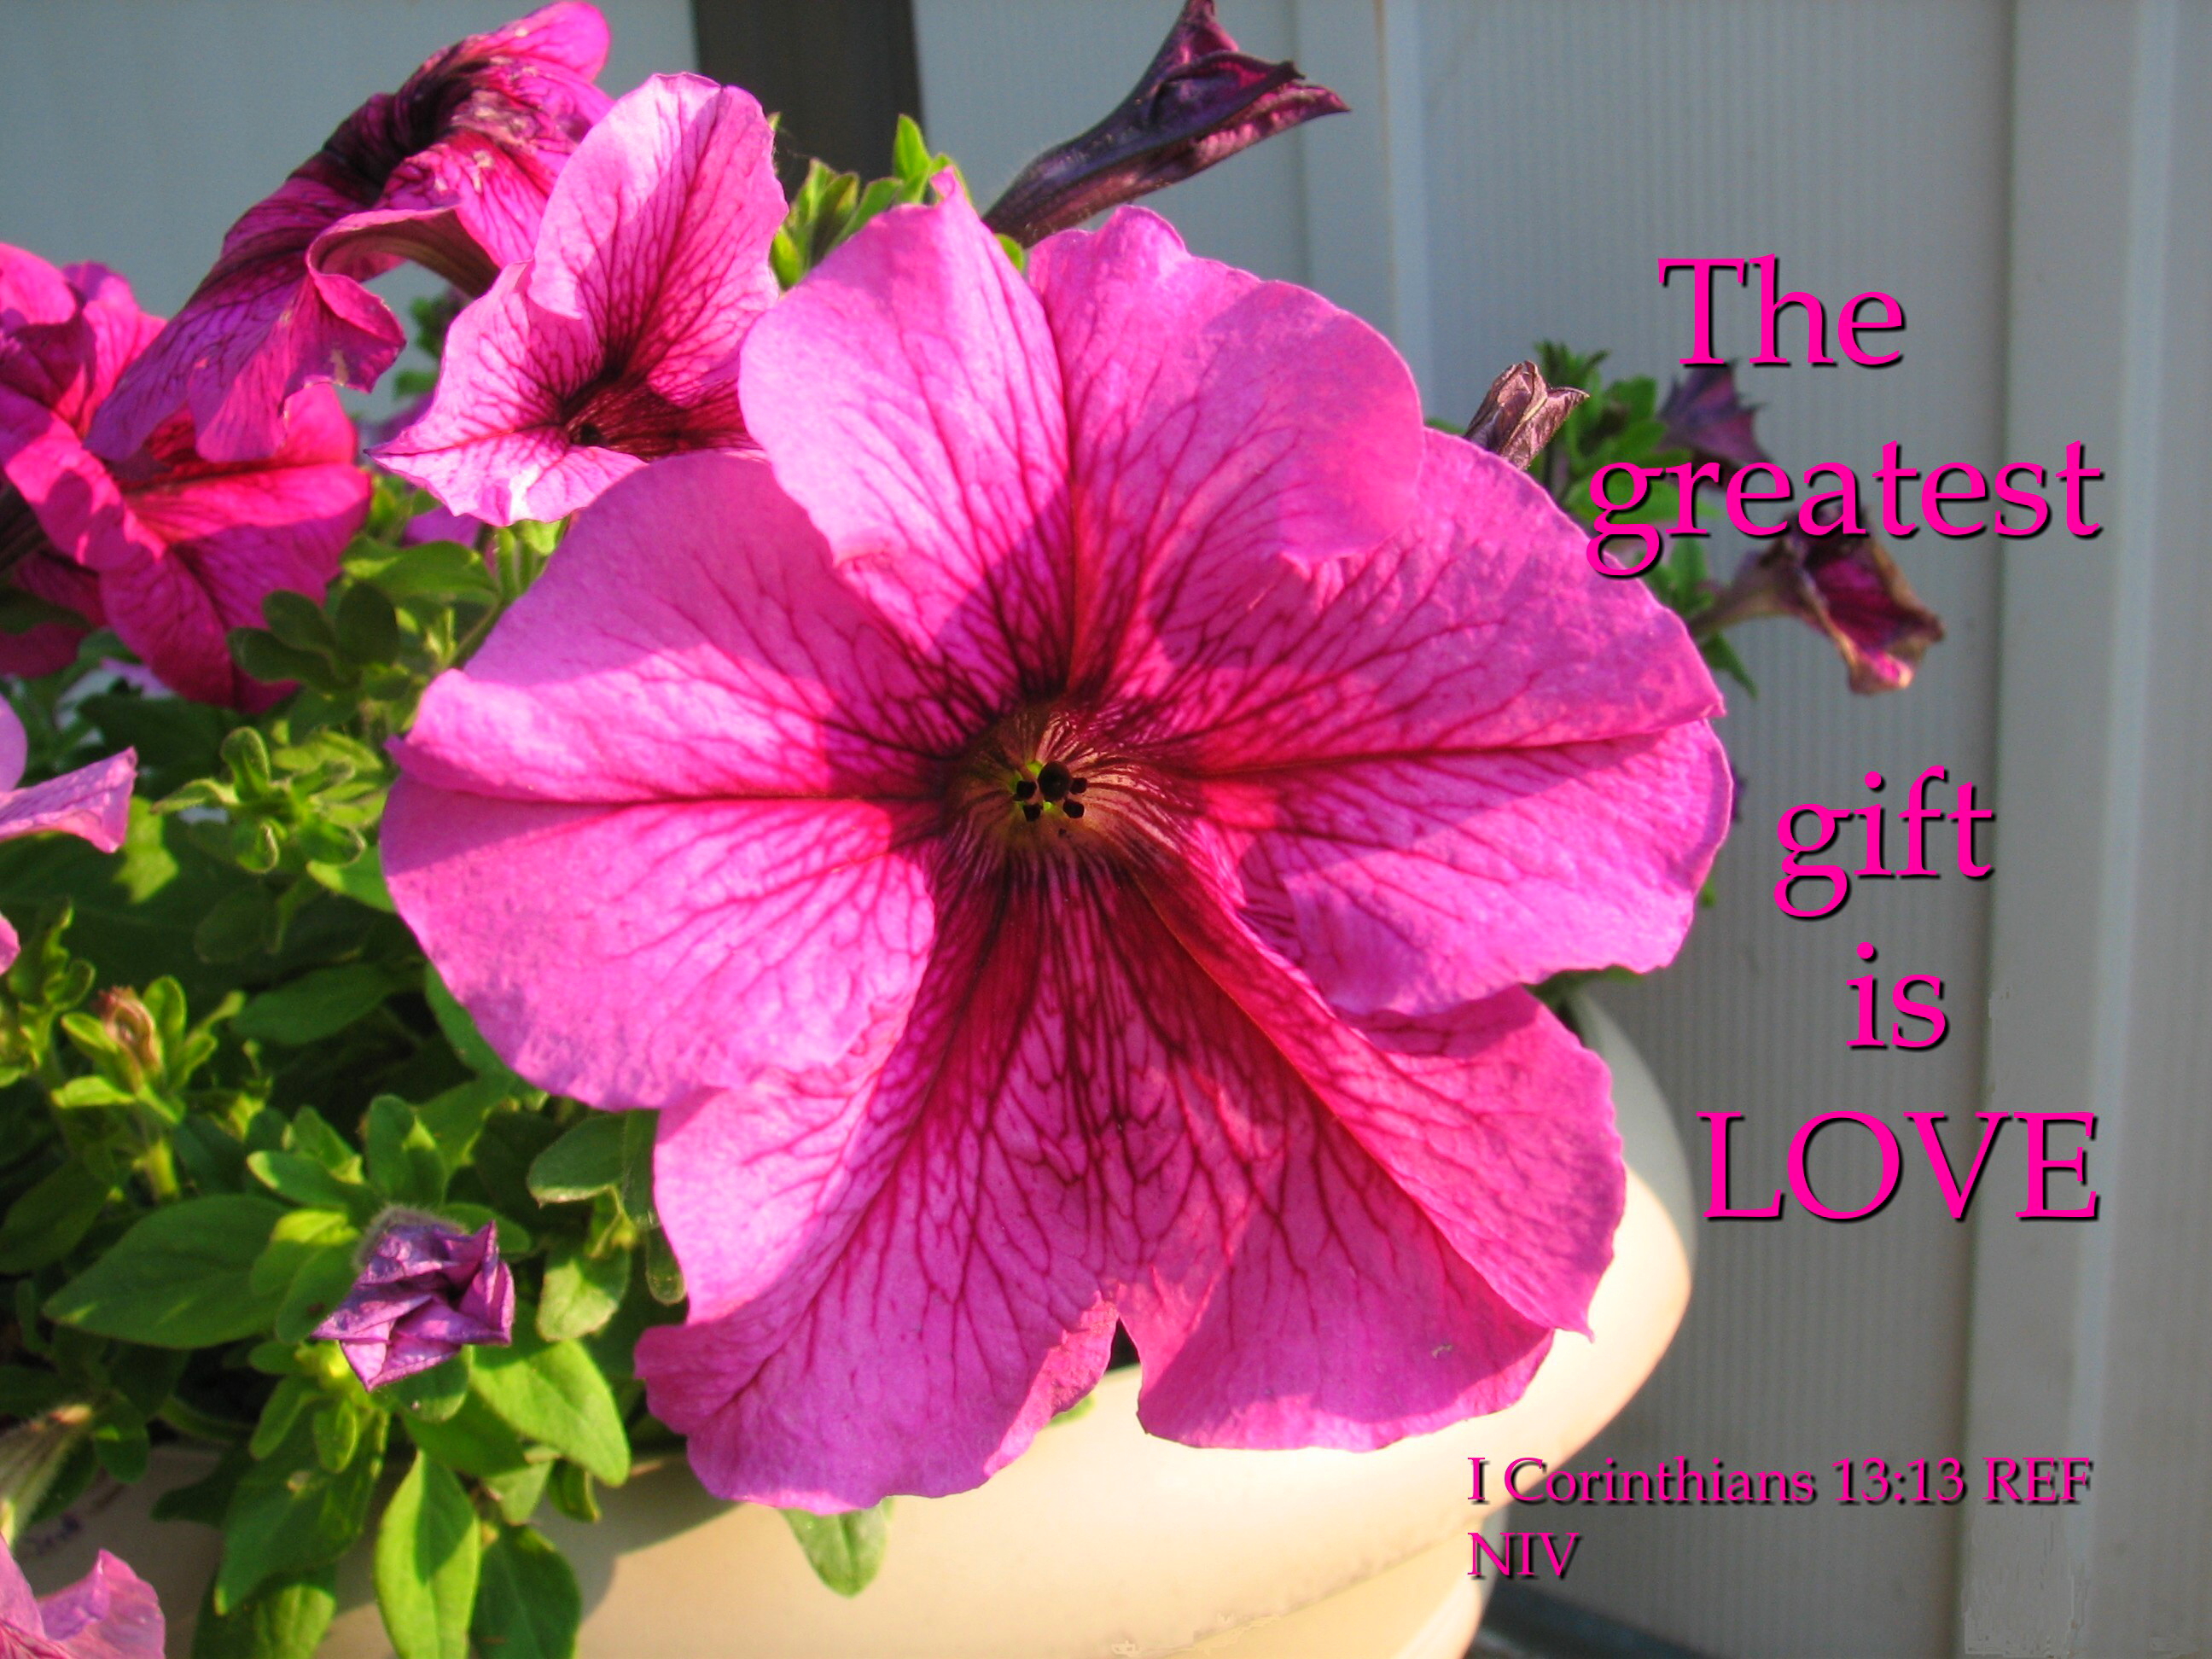 The greatest gift is love photo